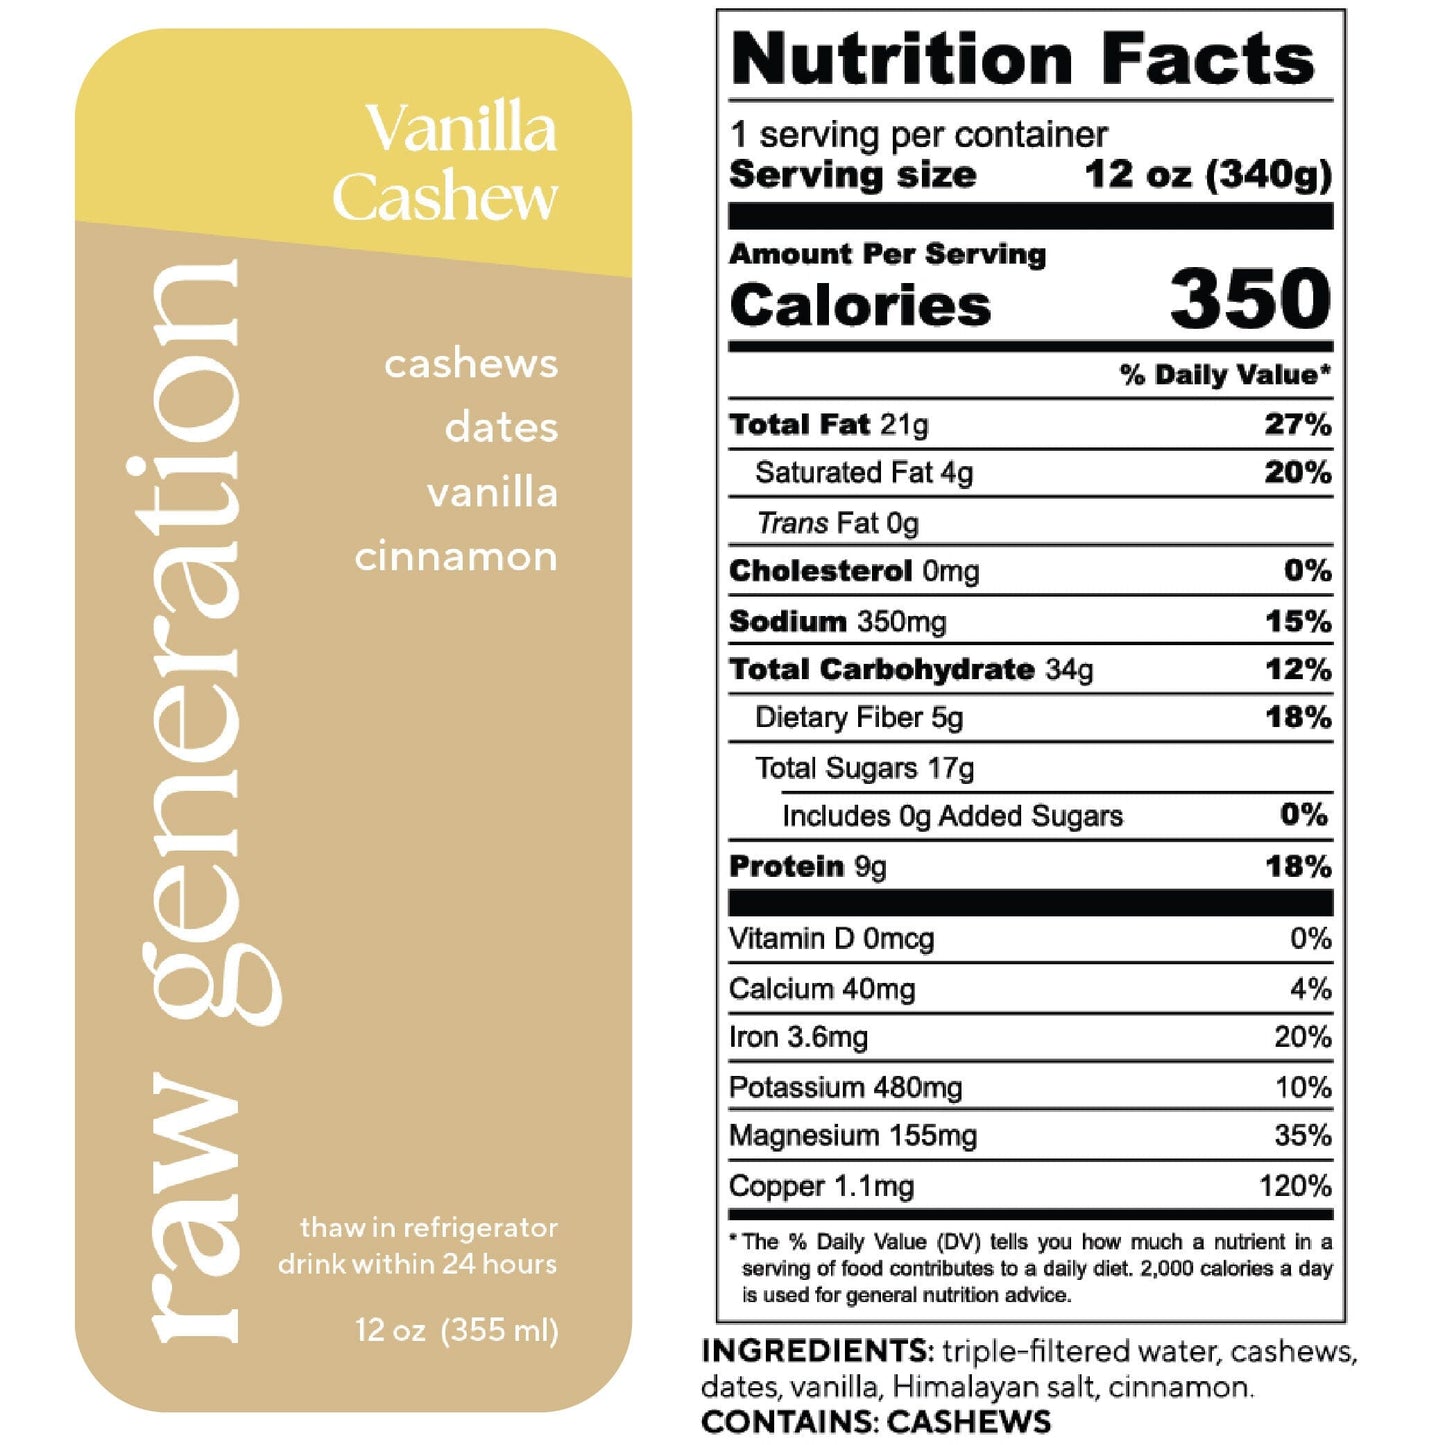 Nutrition Facts, 1 serving/container, Serving size 12 oz (340g), Calories 350, Total Fat 21g, Saturated Fat 4g, Trans Fat 0g, Cholesterol 0mg, Sodium 350mg, Total Carbohydrate 34g, Dietary Fiber 5g, Total Sugars 17g, Added Sugars 0g, Protein 9g, Vitamin D 0mcg, Calcium 40mg, Iron 36mg, Potassium 480mg, Magnesium 155mg, Copper 1.1mg; Ingredients used: triple-filtered water, cashews, dates, vanilla extract, Himalayan salt, cinnamon. CONTAINS: CASHEWS.